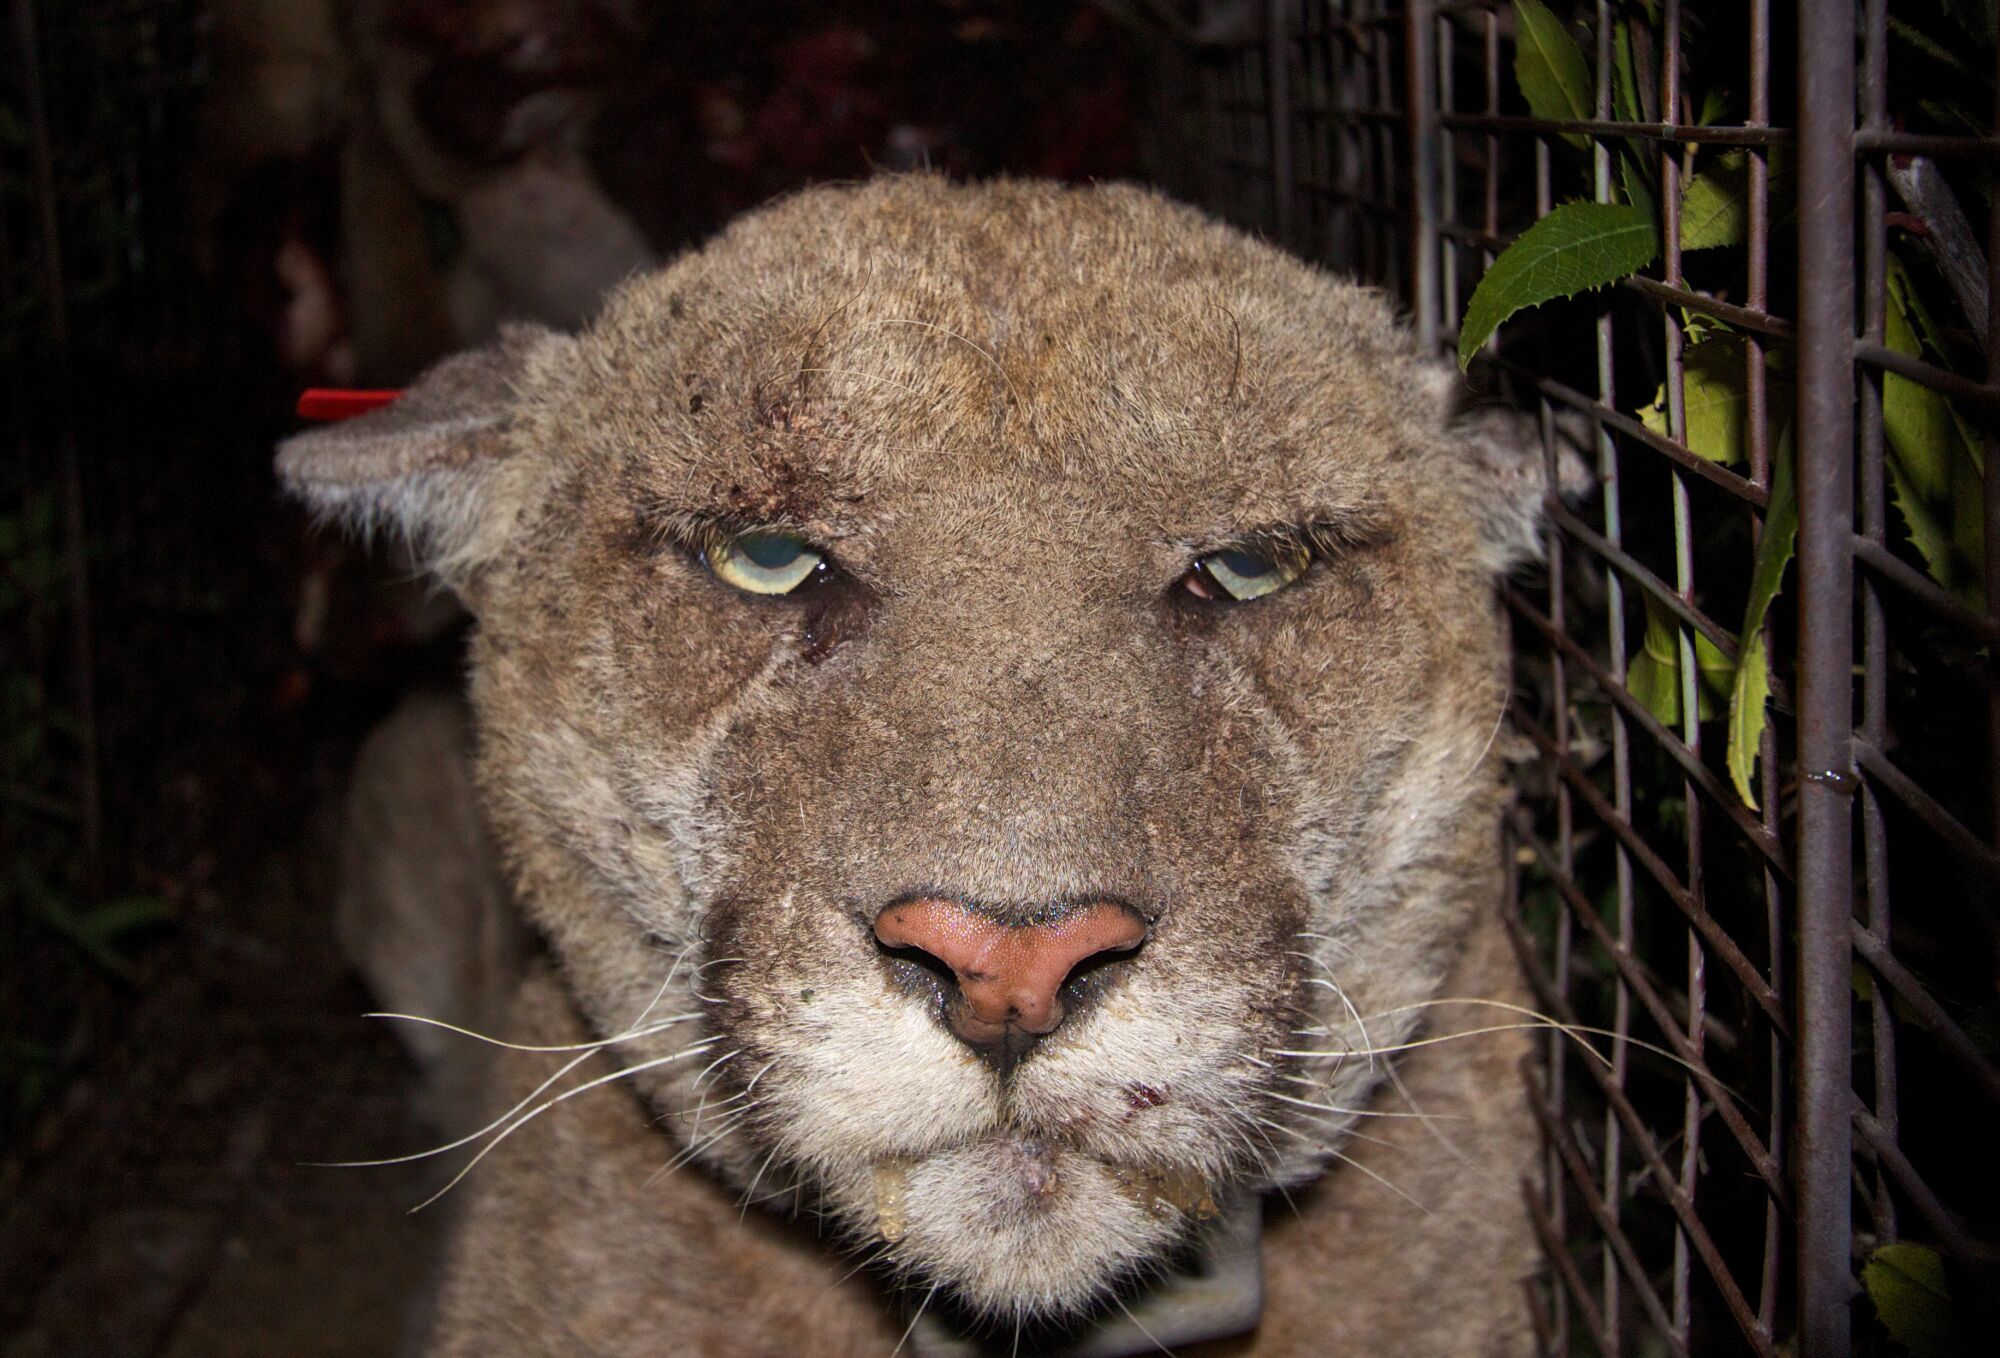 The face of a mountain lion that appears under the weather, with eyes half-closed and crusting on his fur and skin